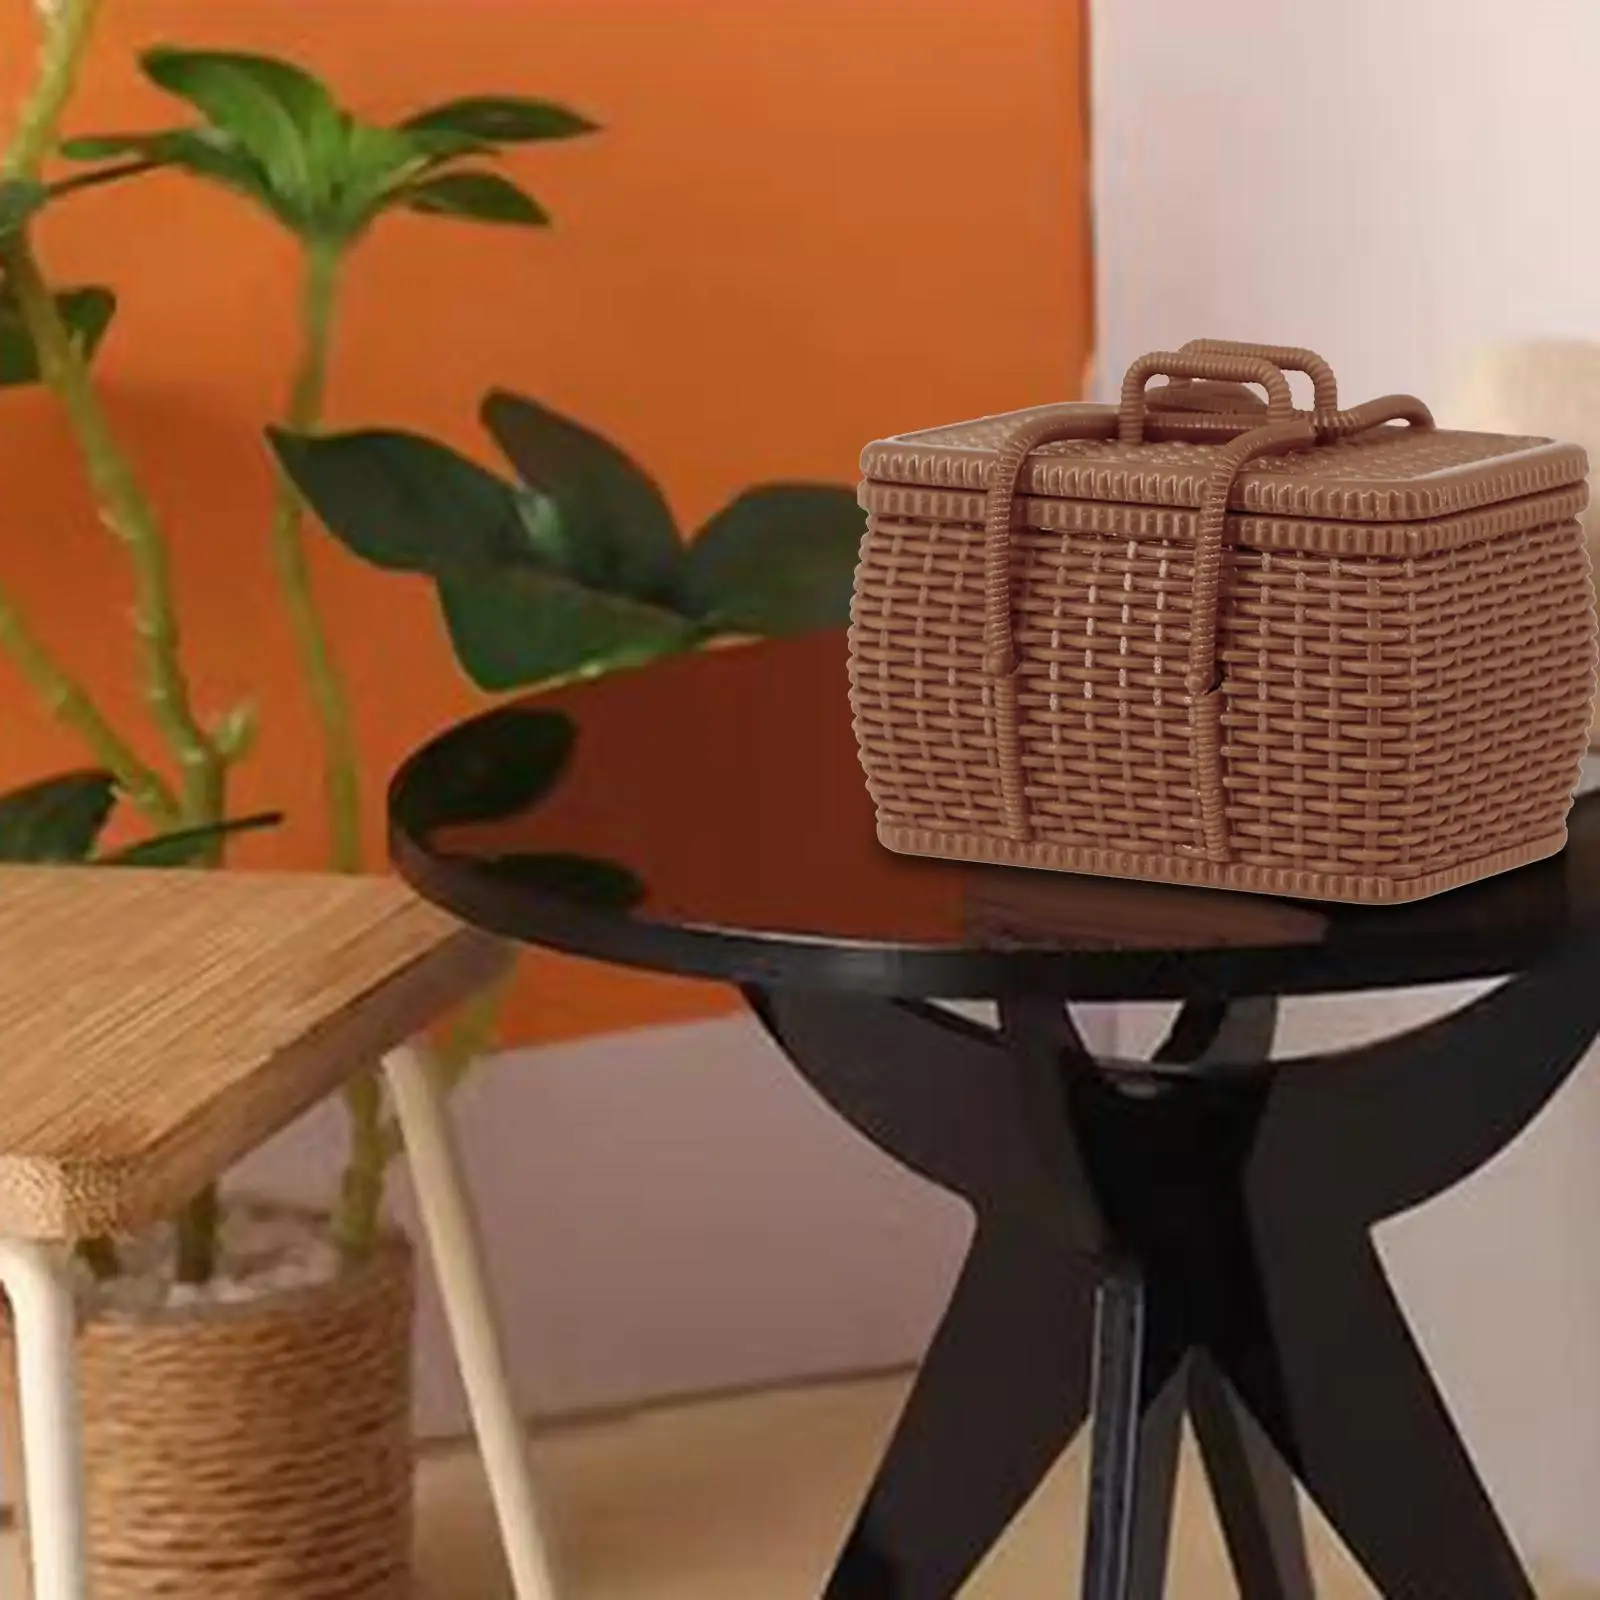 1/6 Doll House Basket Furniture Model Realistic Miniature Woven Basket for DIY Scenery Action Figures Accs